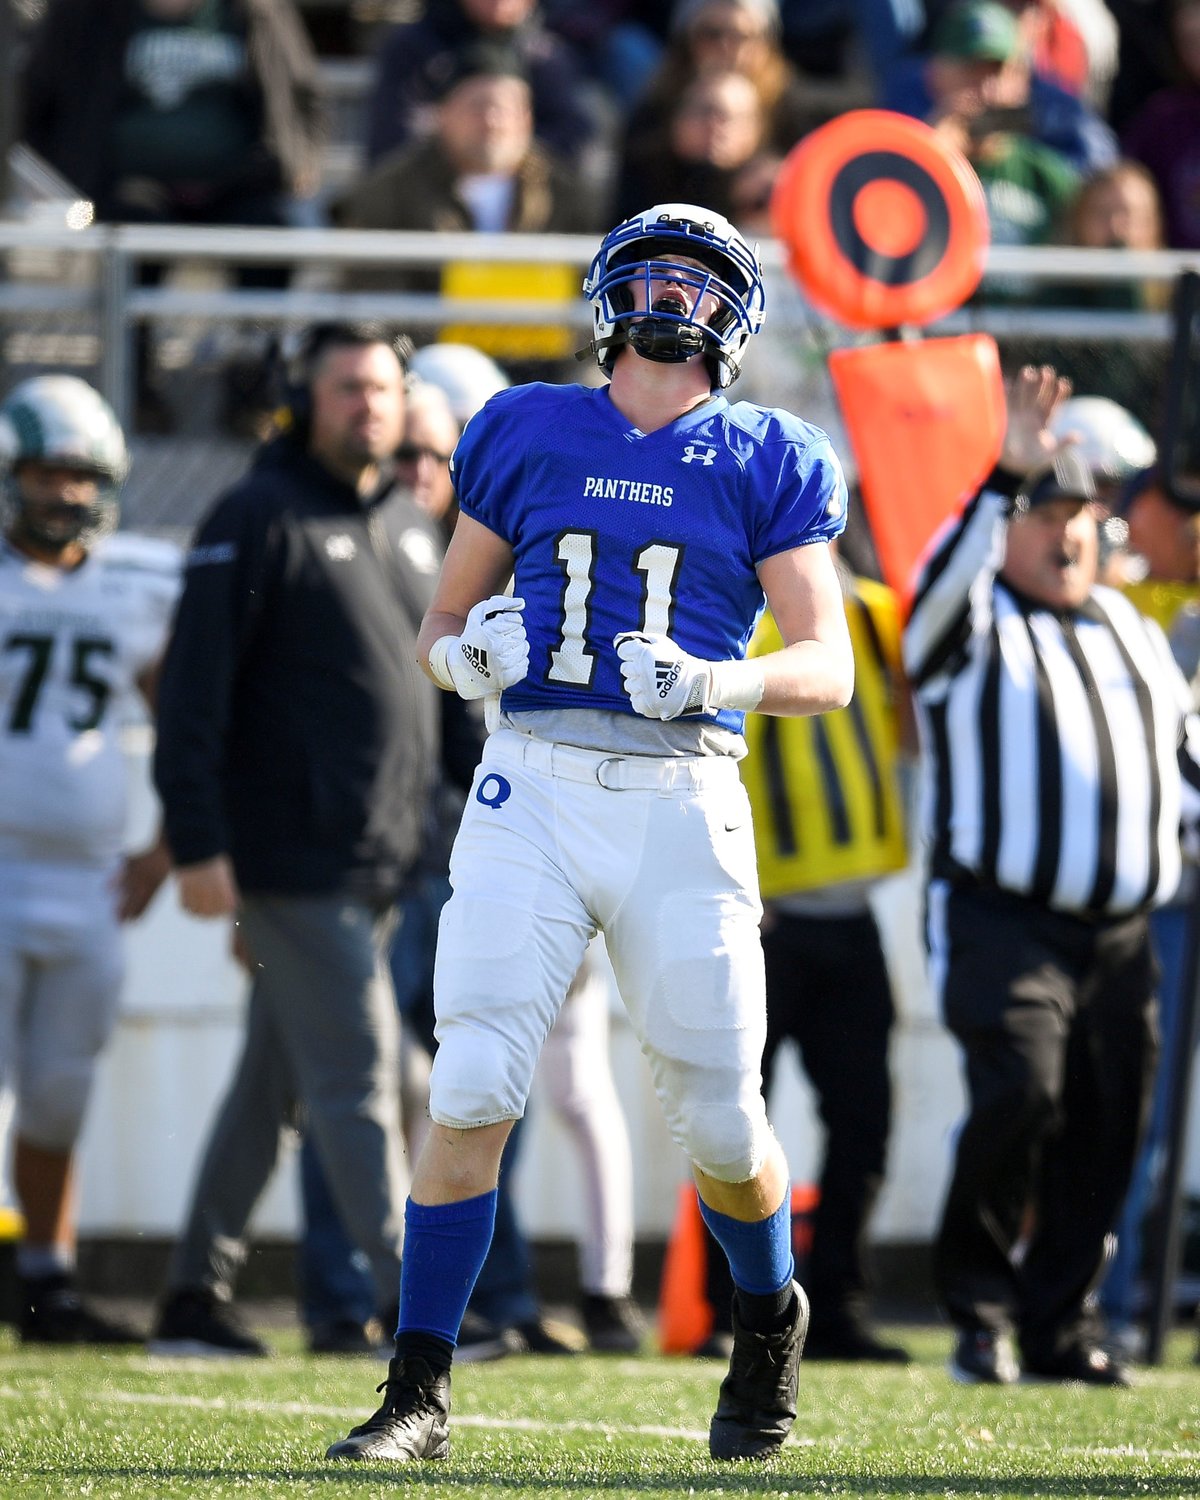 Quakertown’s Anthony Ferrugio is hyped up after a big defensive play late in the fourth quarter.